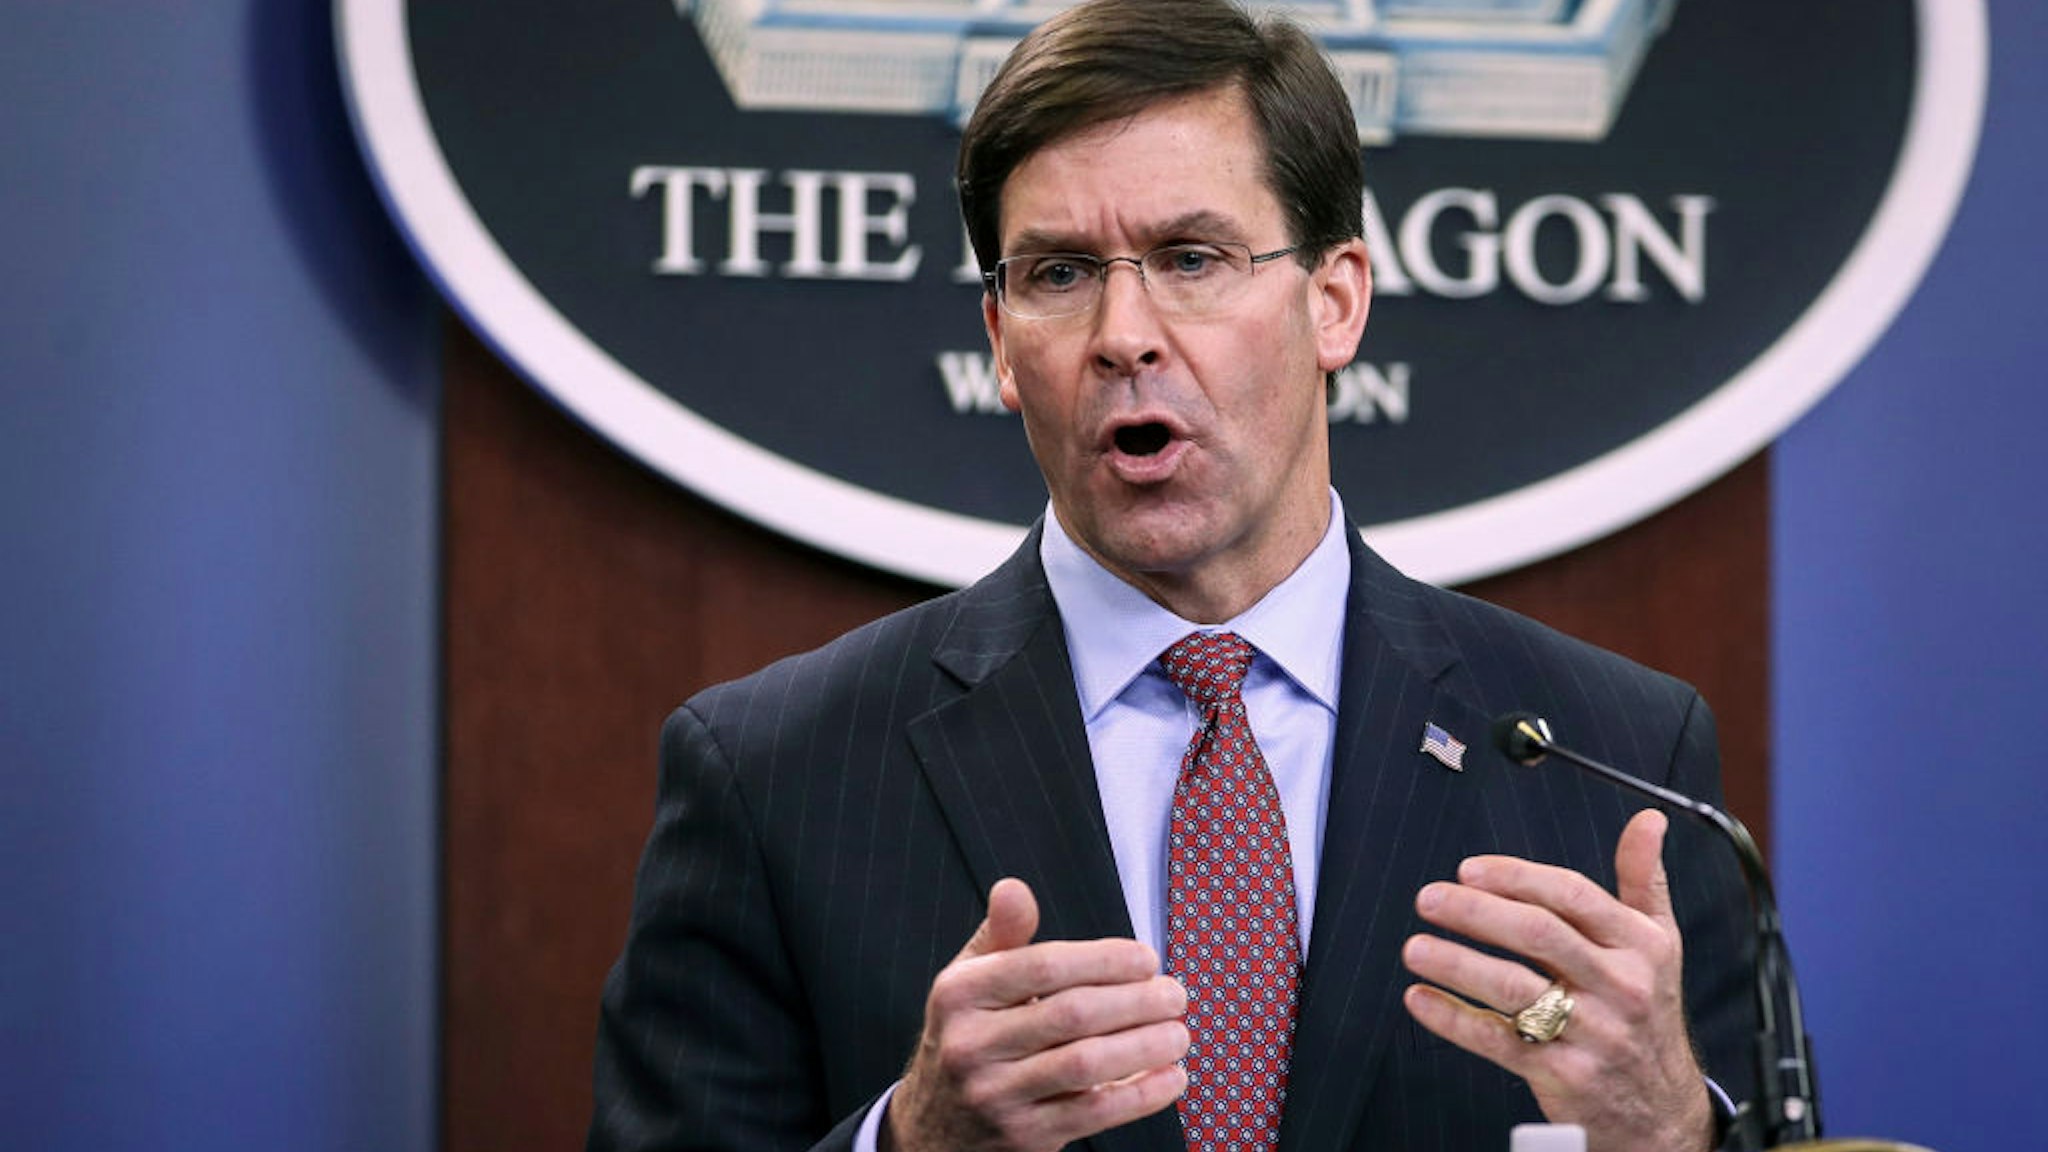 Secretary of Defense Mark Esper holds an end of year press conference at the Pentagon on December 20, 2019 in Arlington, Virginia.